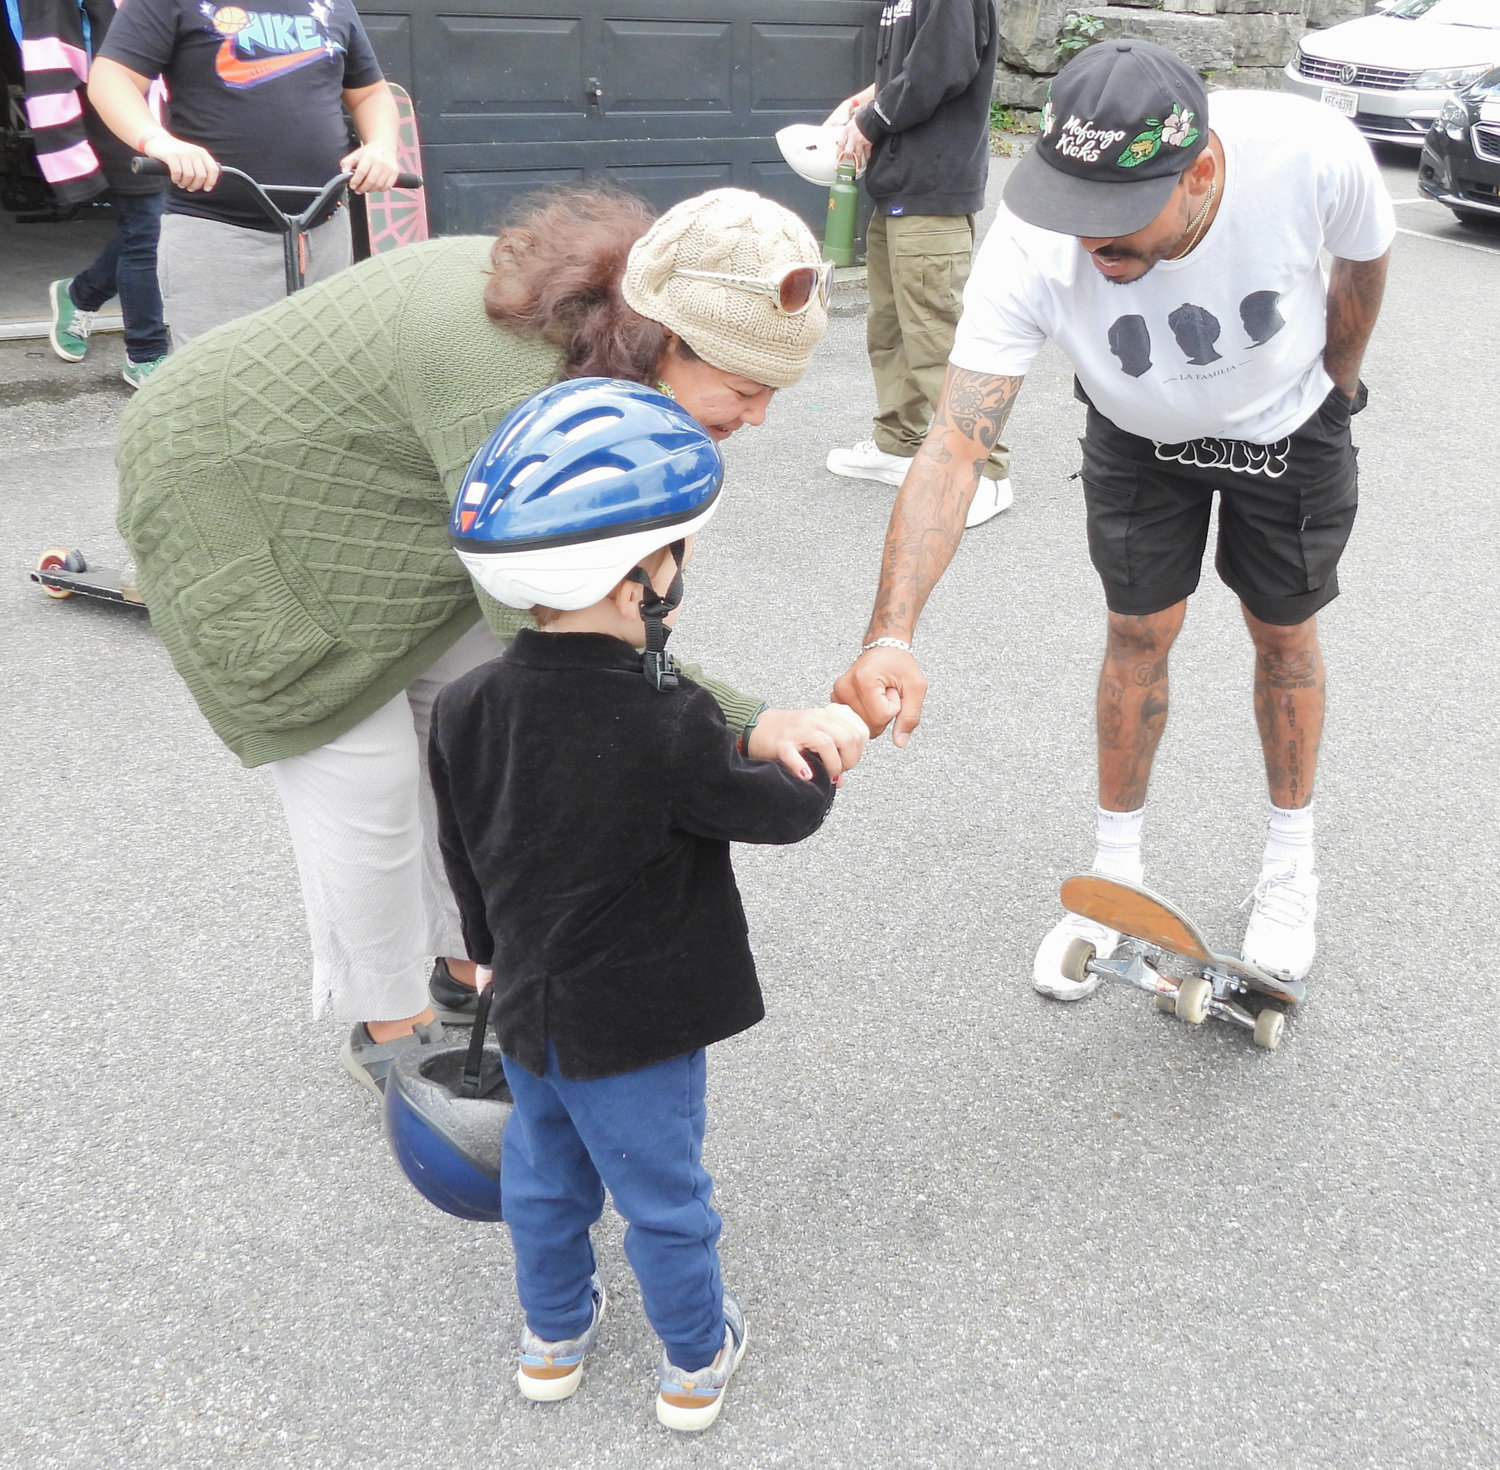 Emanuel “Manny” Santiago bumps fist with a young skater at Lenox Skate Park on Saturday, Sept. 24. Santiago was in town as part of his efforts to help youngsters develop life building skills as well as social and emotional learning opportunities through skateboarding.